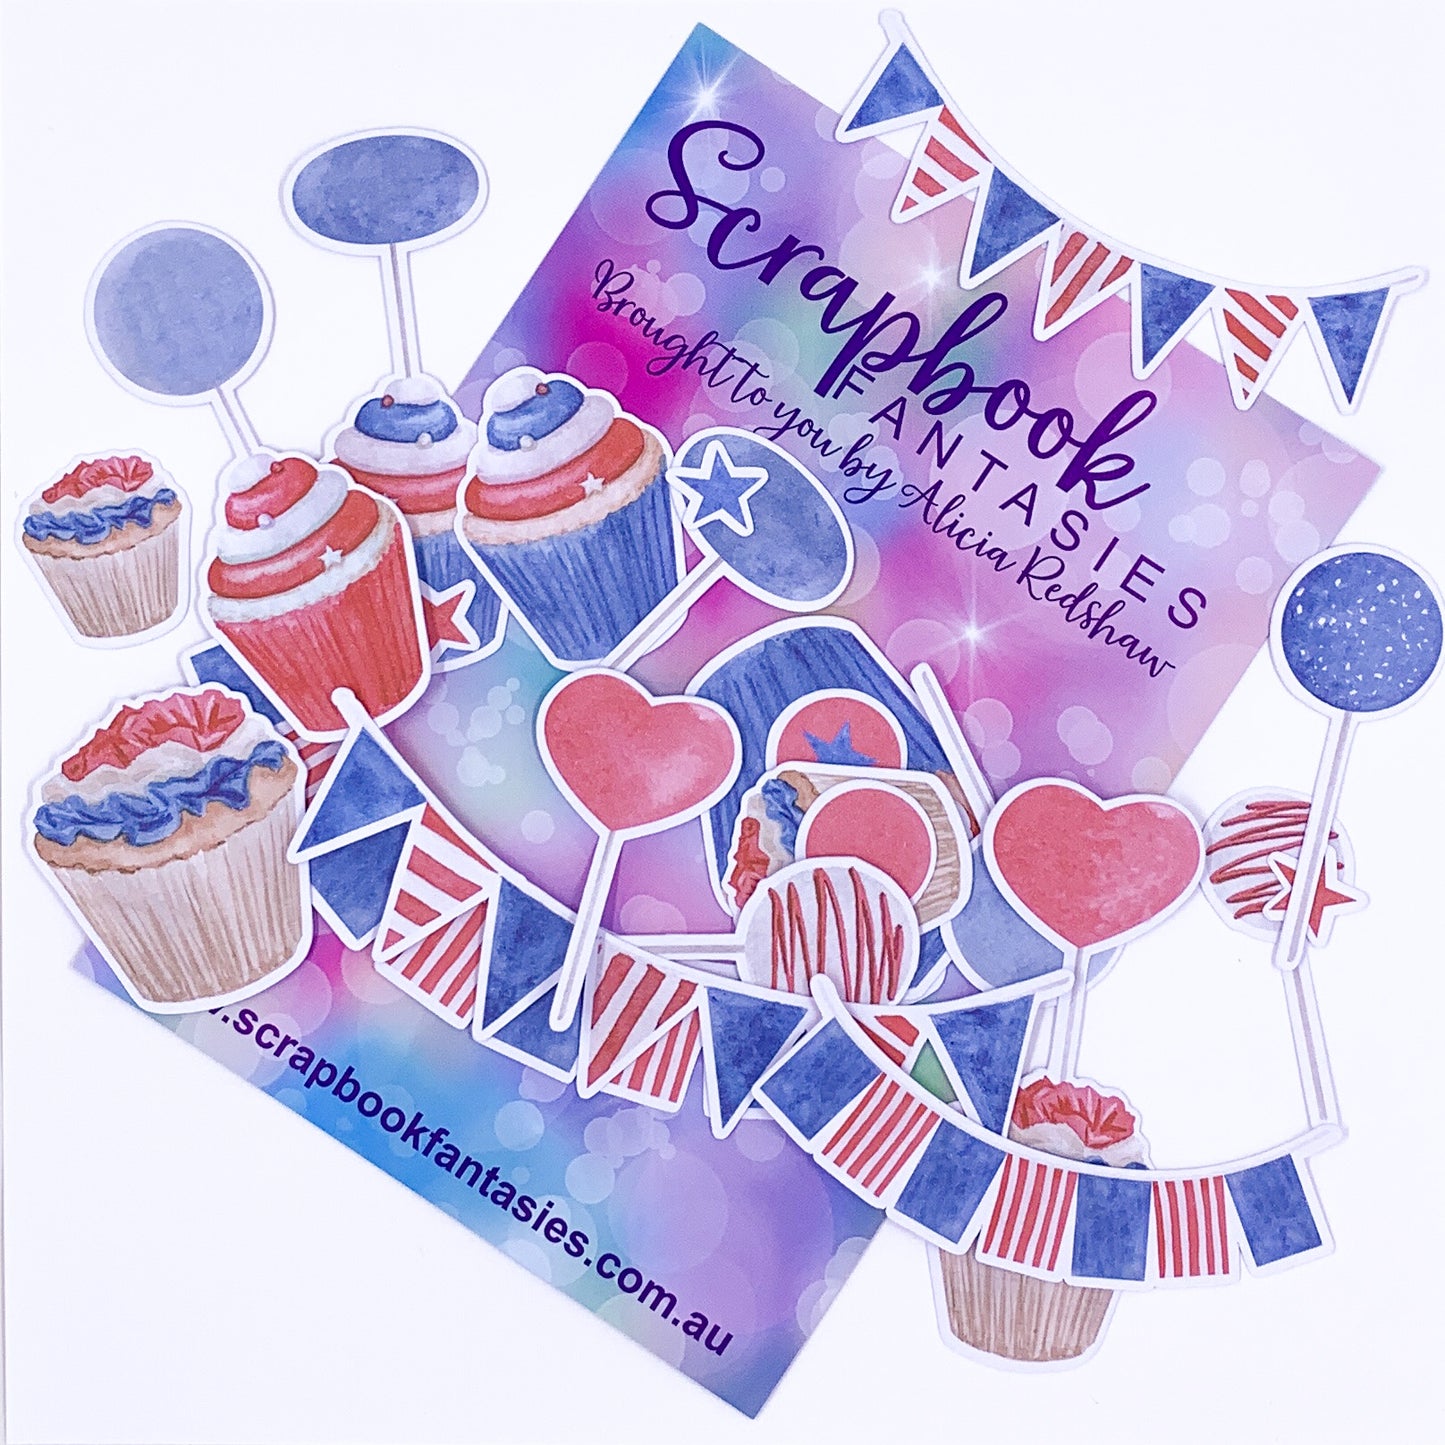 Colour-Cuts - Cupcakes & Banners 2 (26 pieces) Designed by Alicia Redshaw